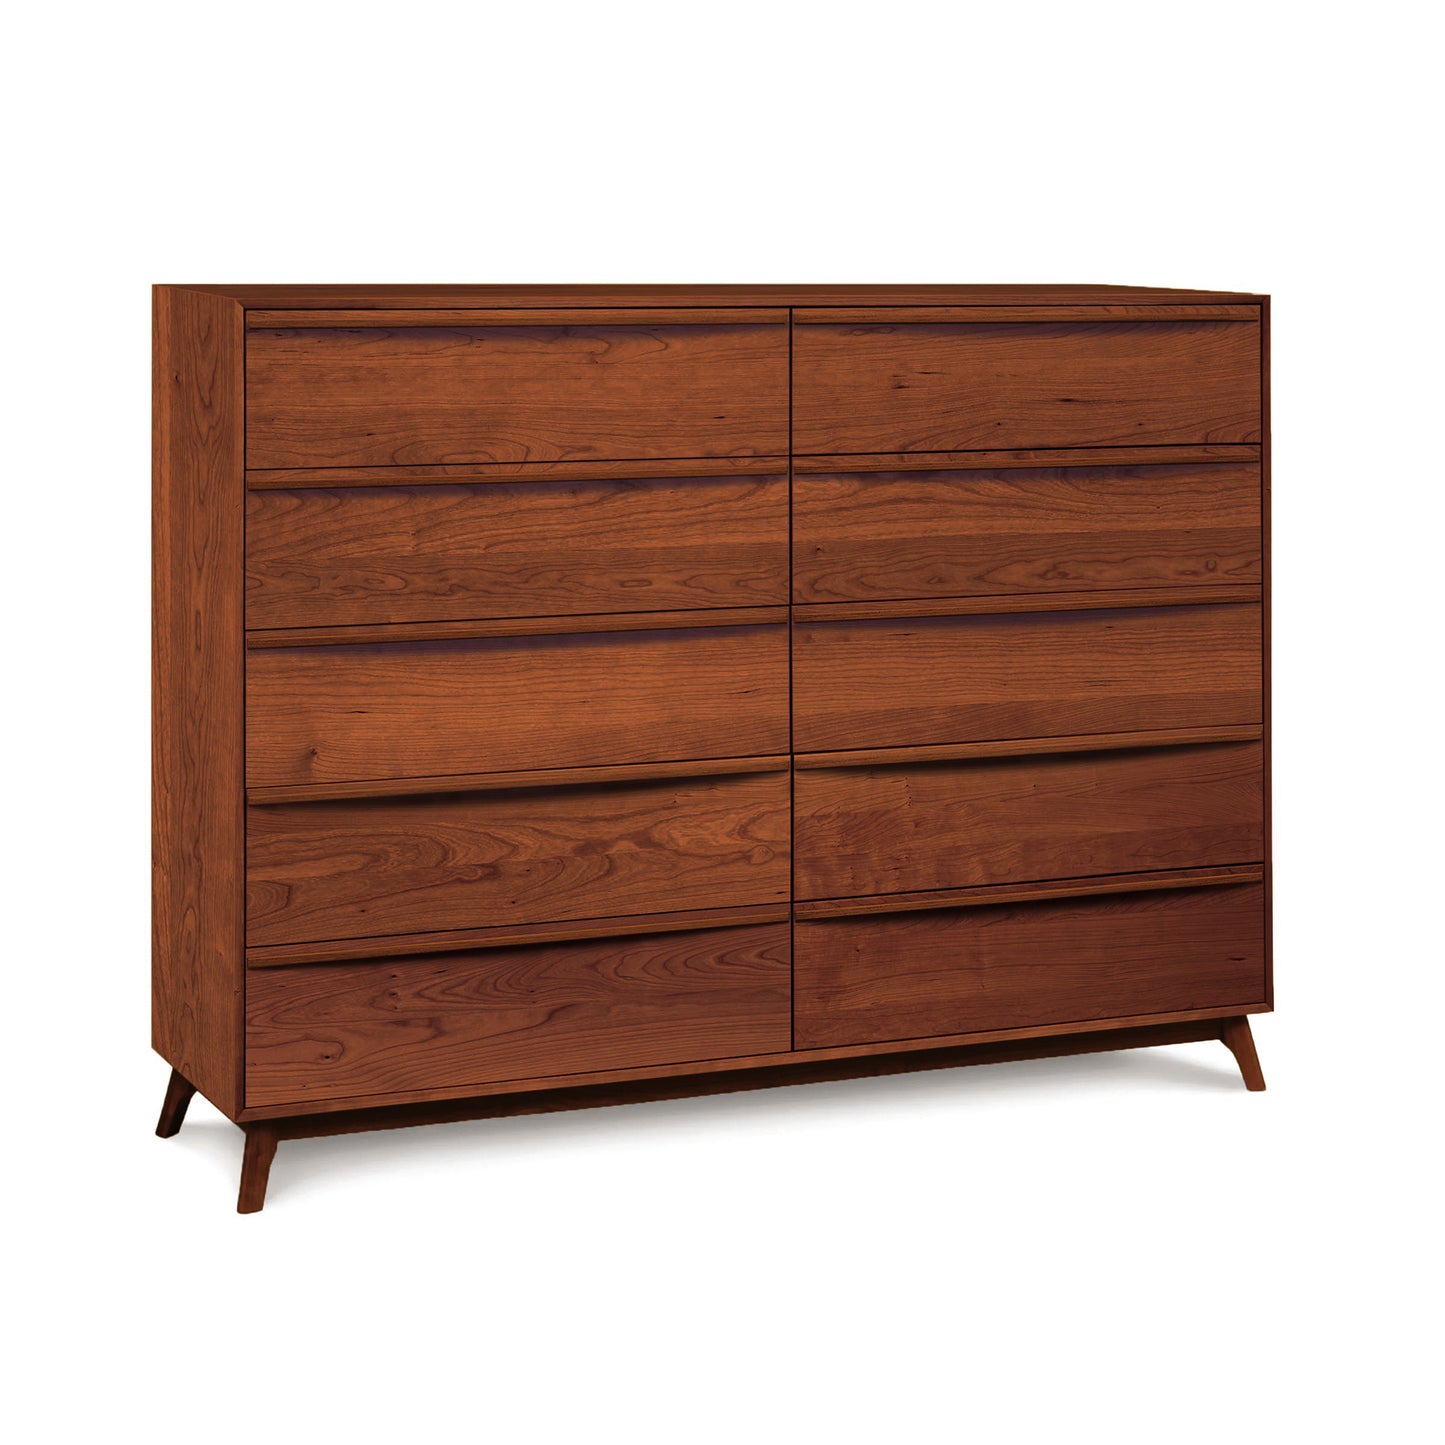 A Catalina 10-Drawer Dresser by Copeland Furniture with angled legs, crafted from natural cherry wood, against a white background.